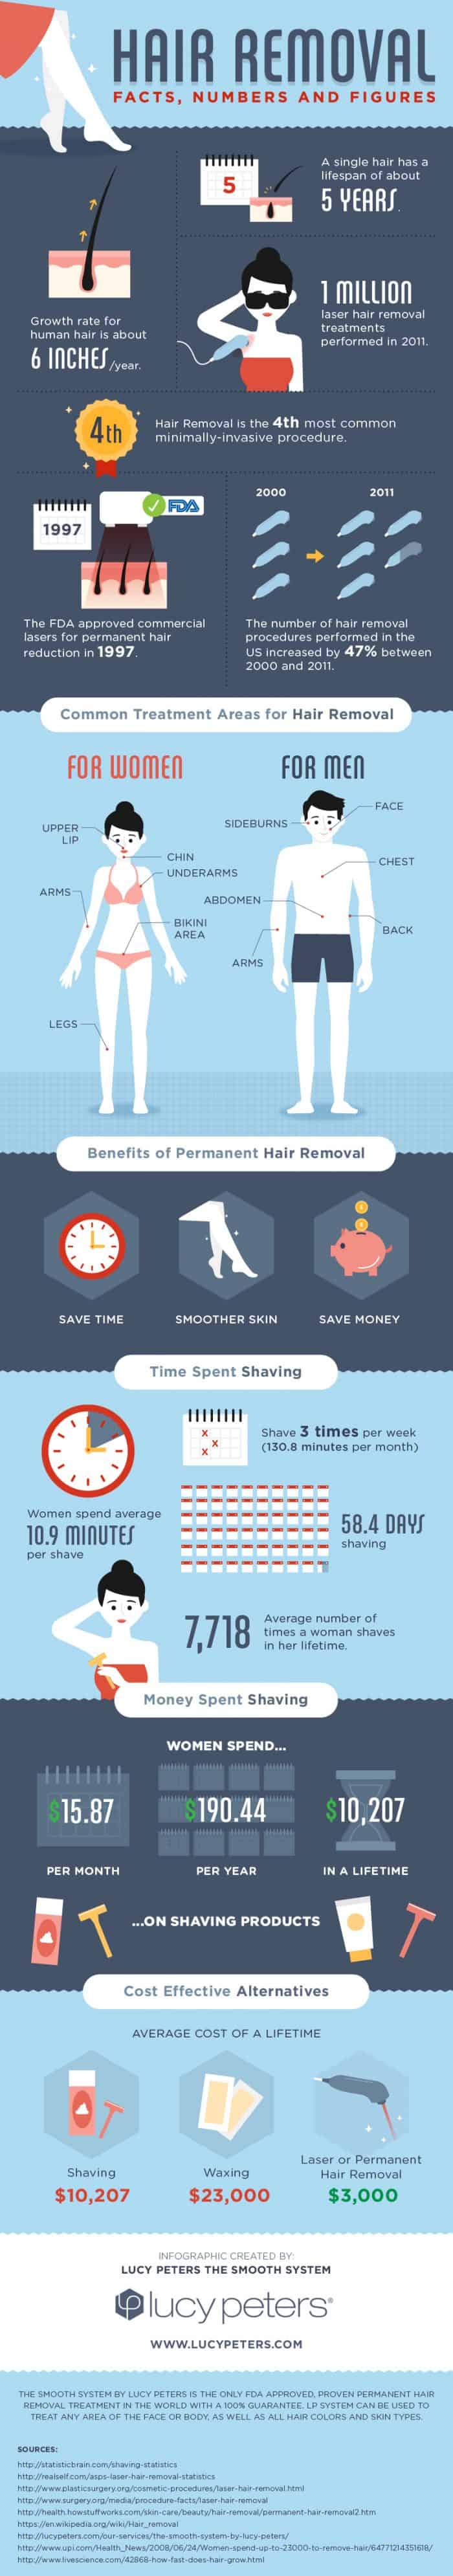 Hair removal facts numbers figures infographic